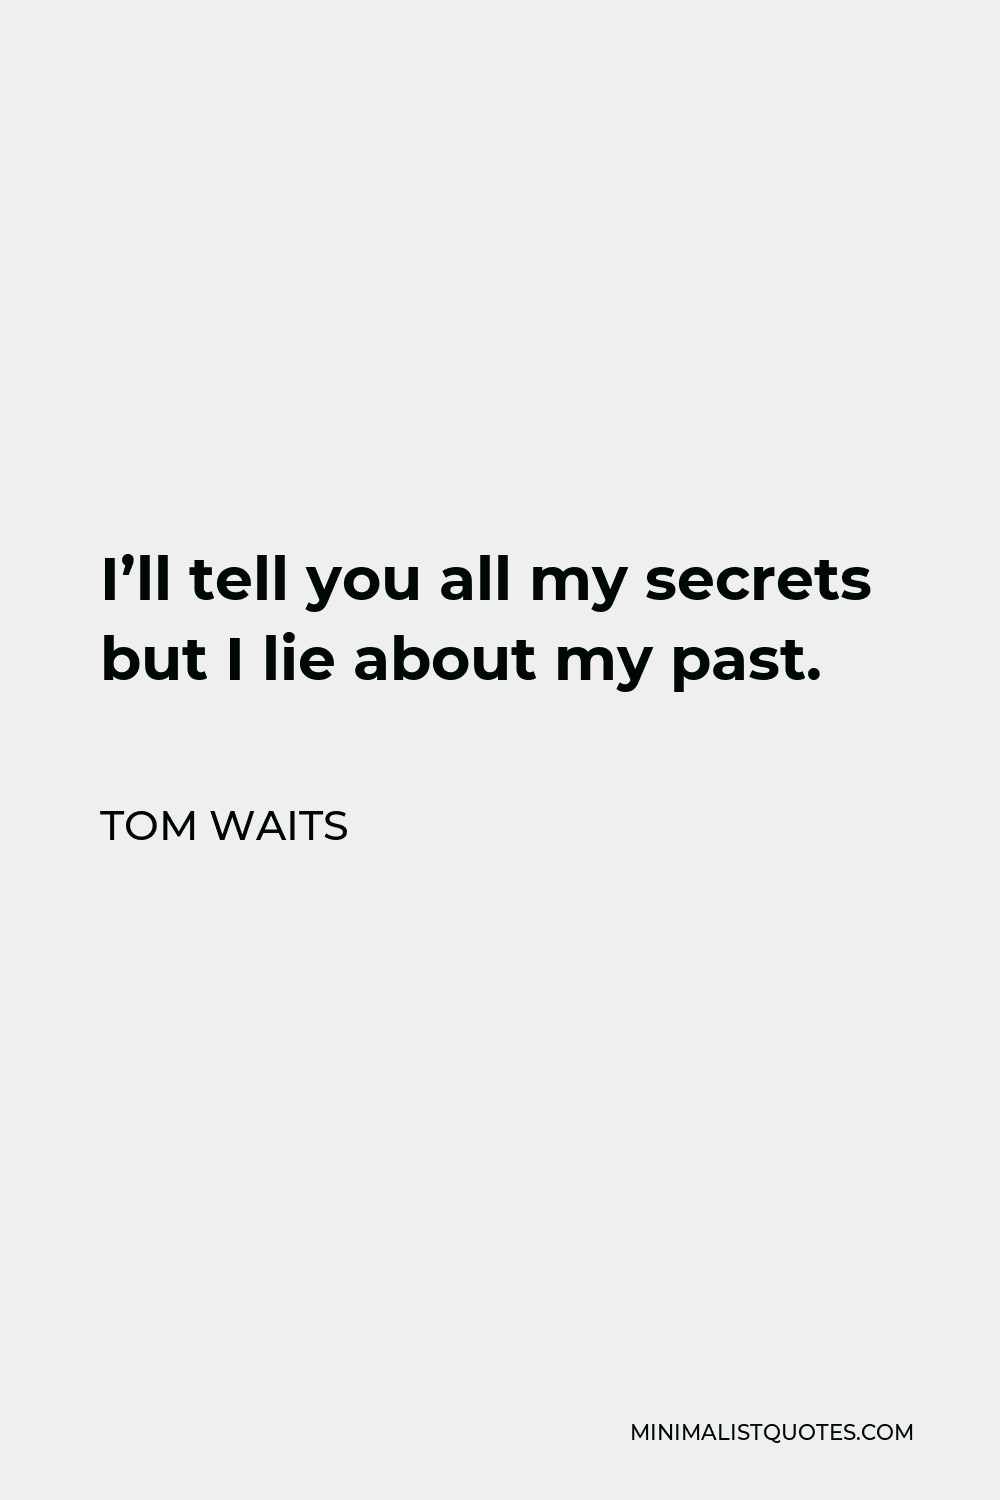 Tom Waits Quote - I’ll tell you all my secrets but I lie about my past.